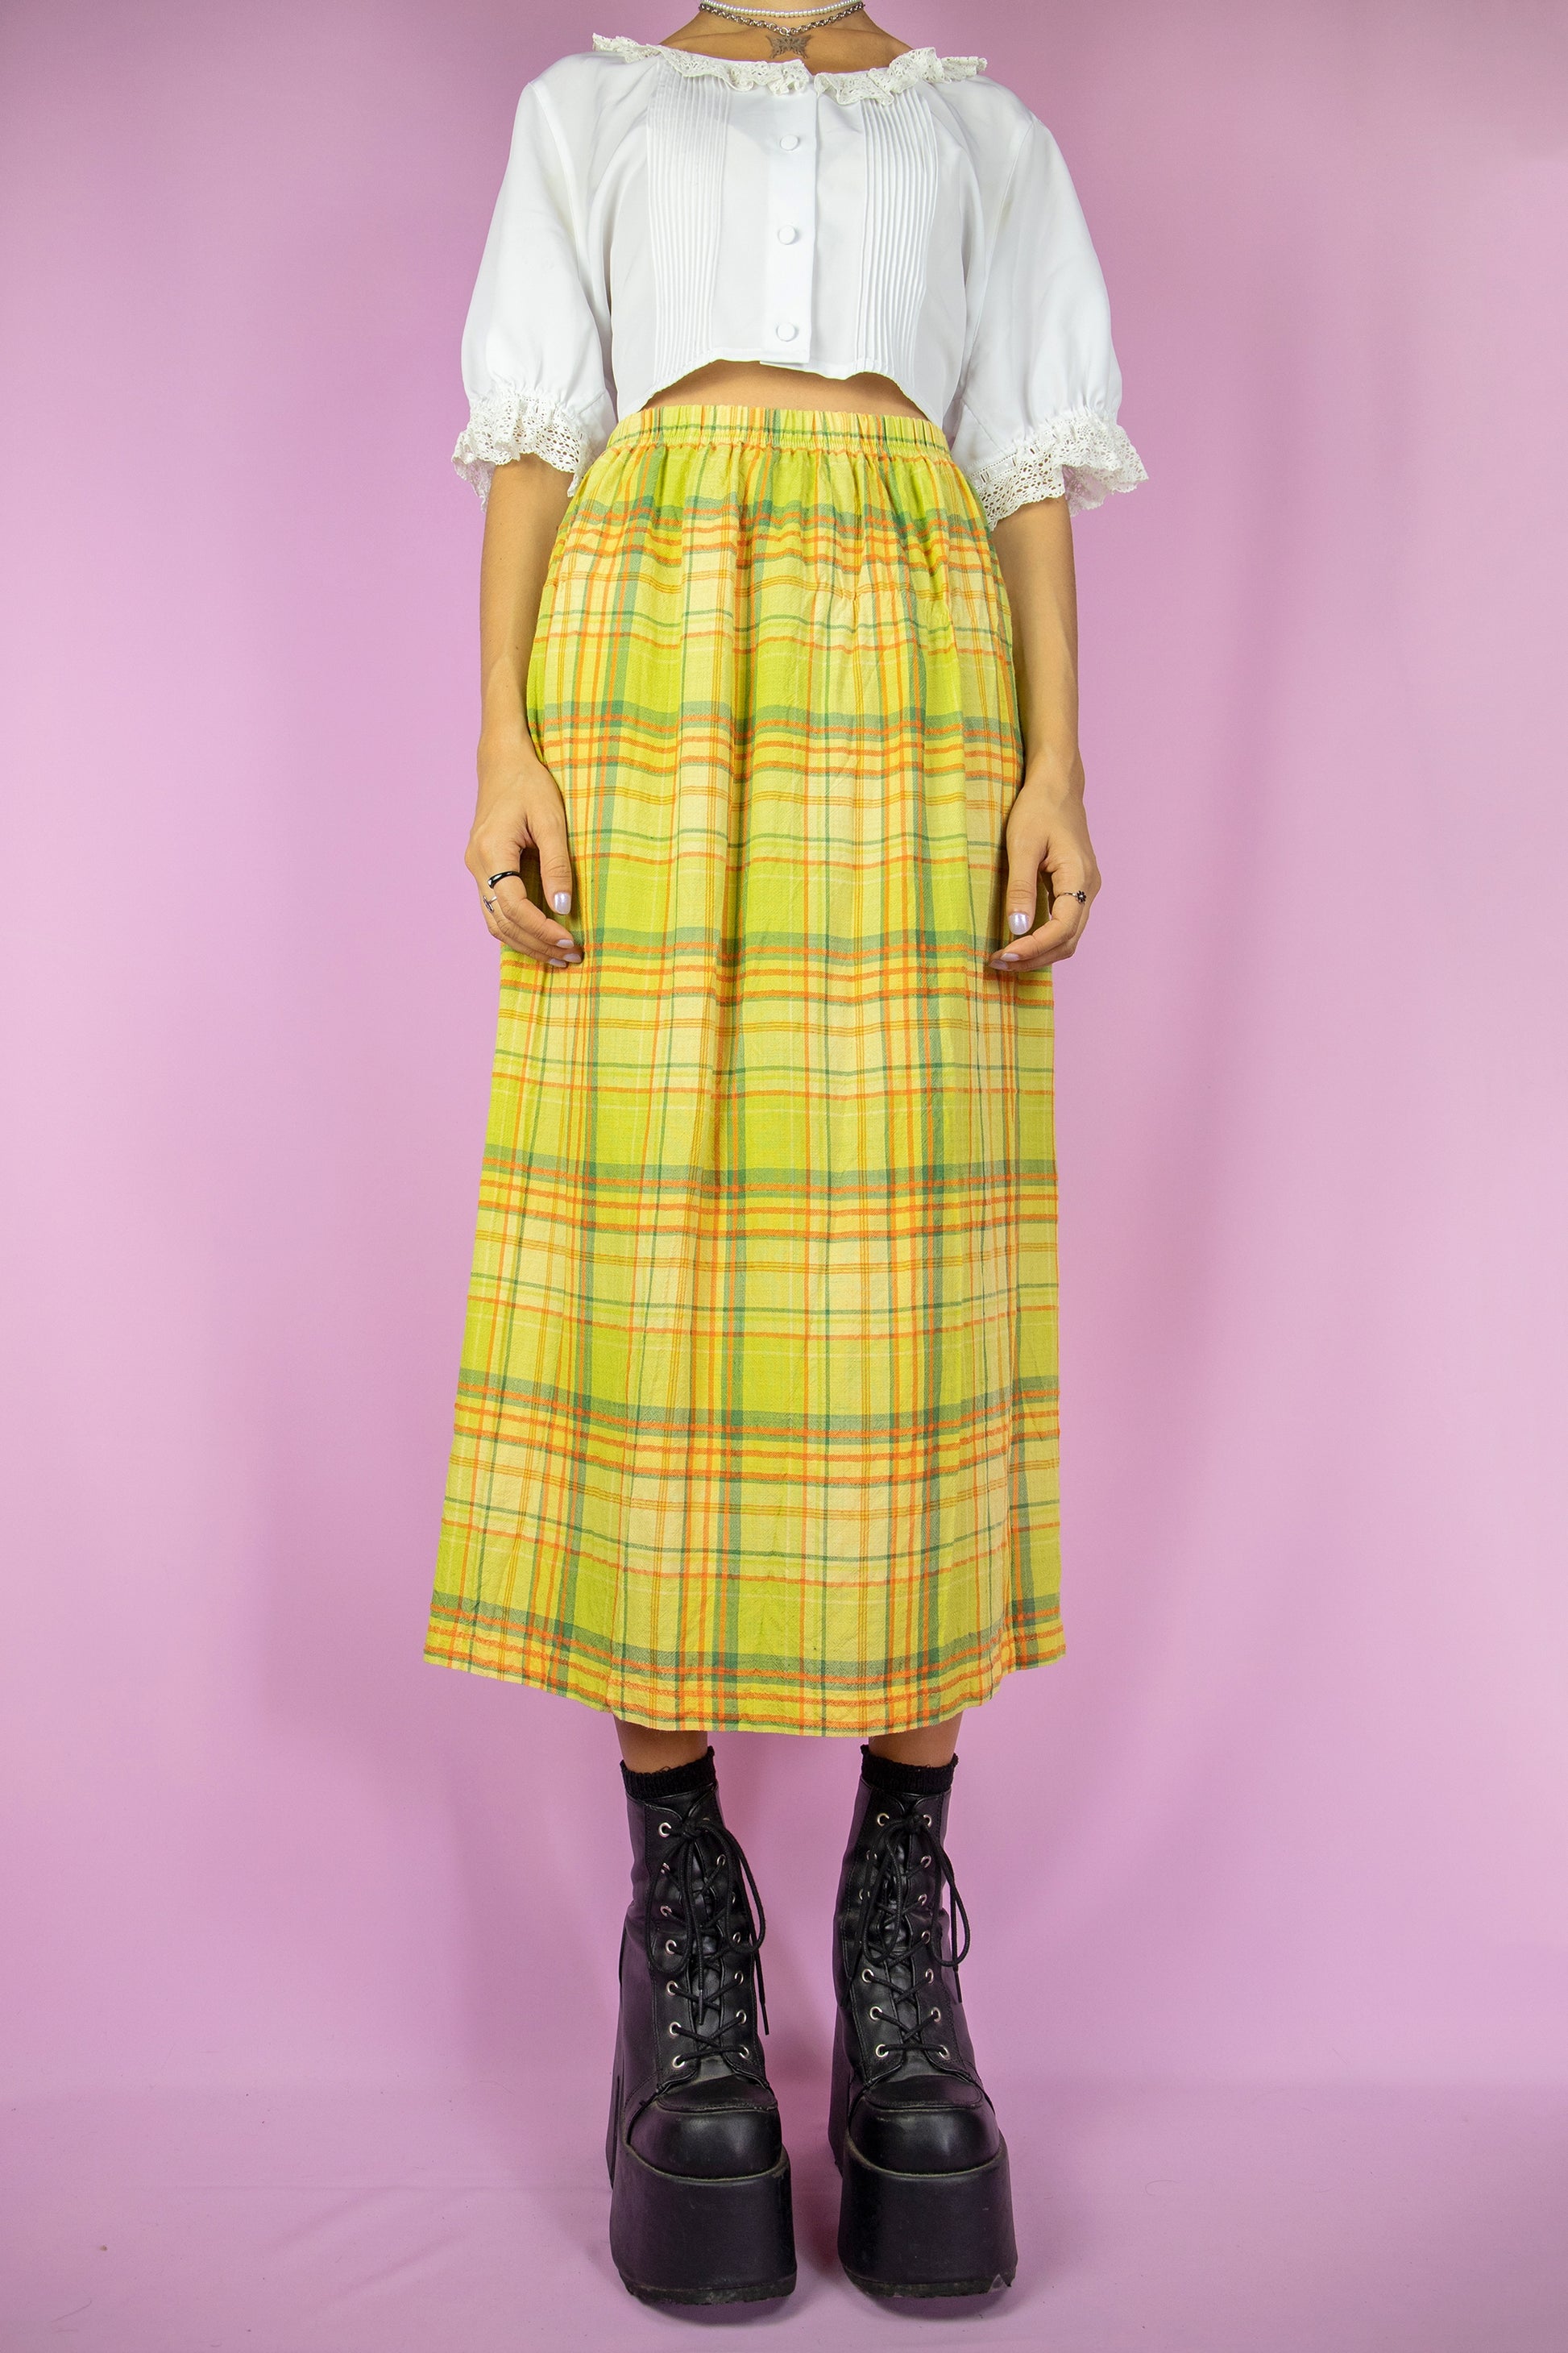 The Vintage 90’s Green Plaid Midi Skirt is a long, green, yellow, and orange checkered skirt featuring a side slit and elastic waist. This super cute boho skirt draws inspiration from cottage prairie style, reminiscent of the 1990s.